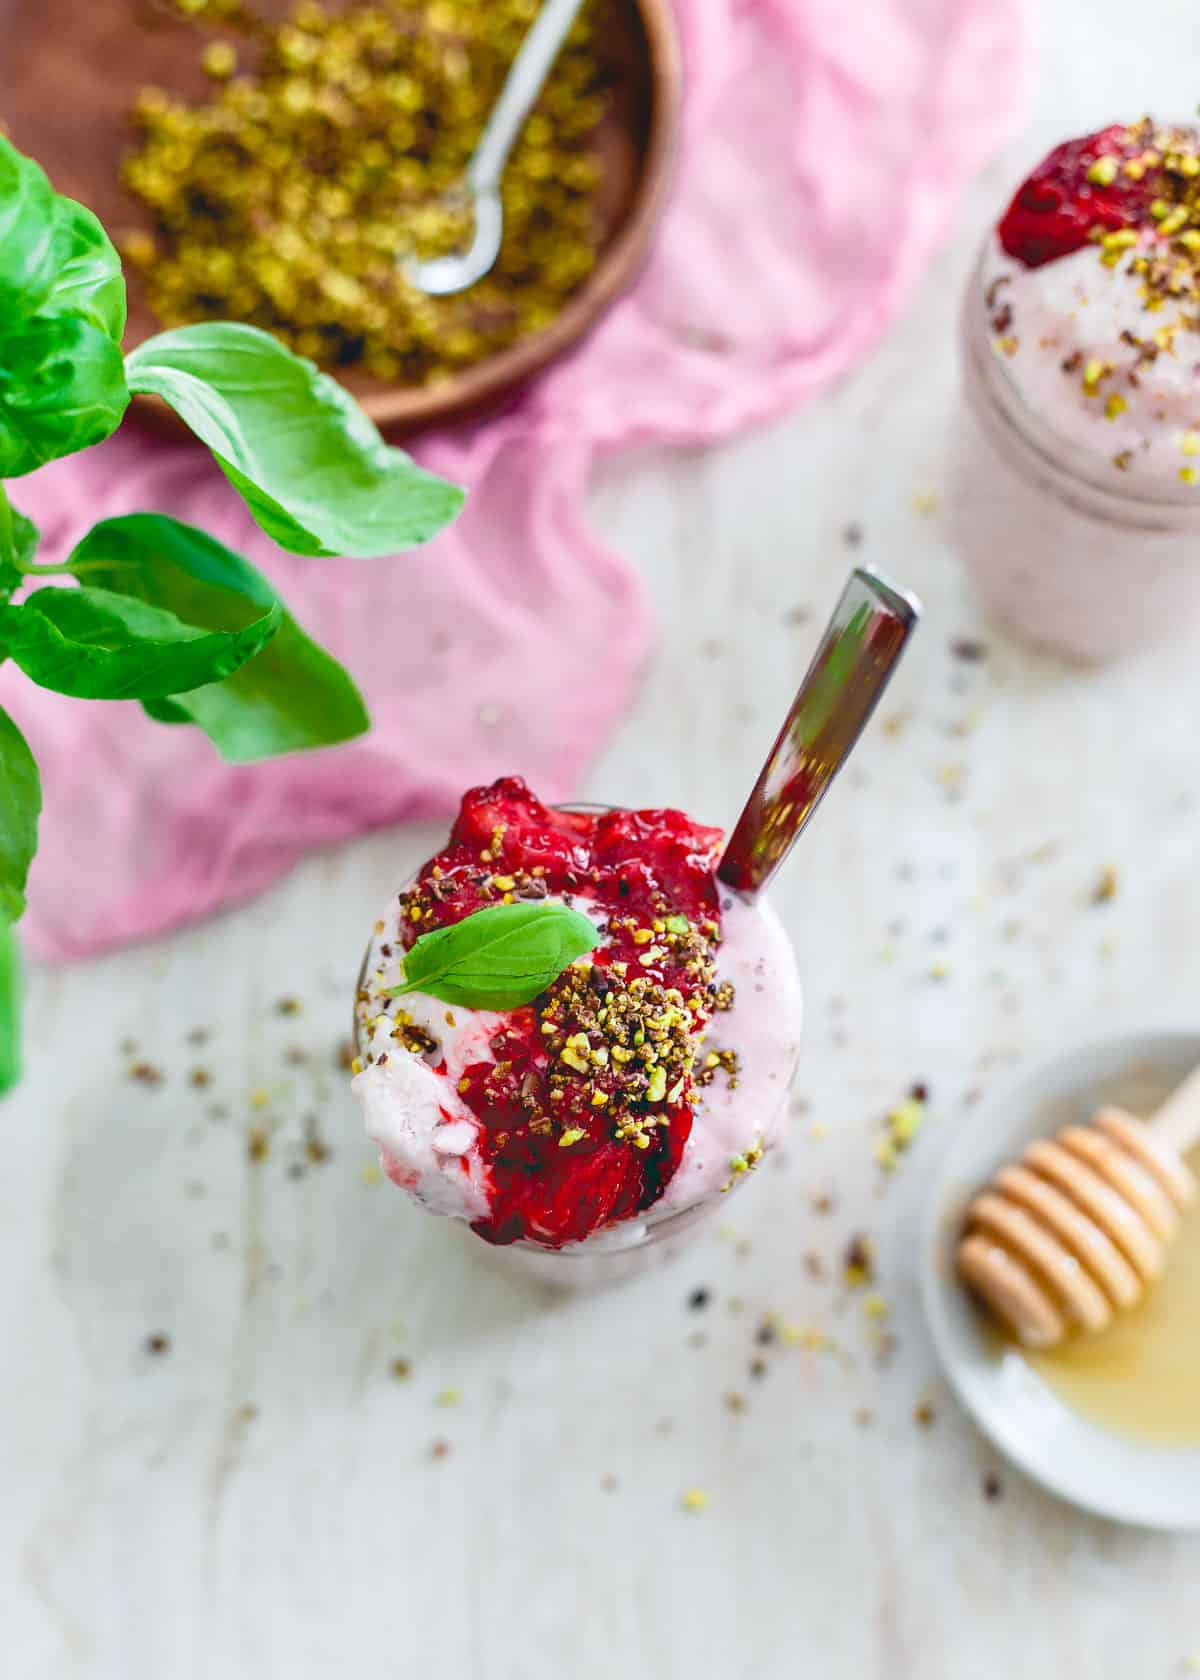 This roasted strawberry basil milkshake is a pretty, pink and festive way to celebrate Valentine's Day! With roasted strawberry topping and a pistachio cacao nib crunch, it's not your average milkshake!